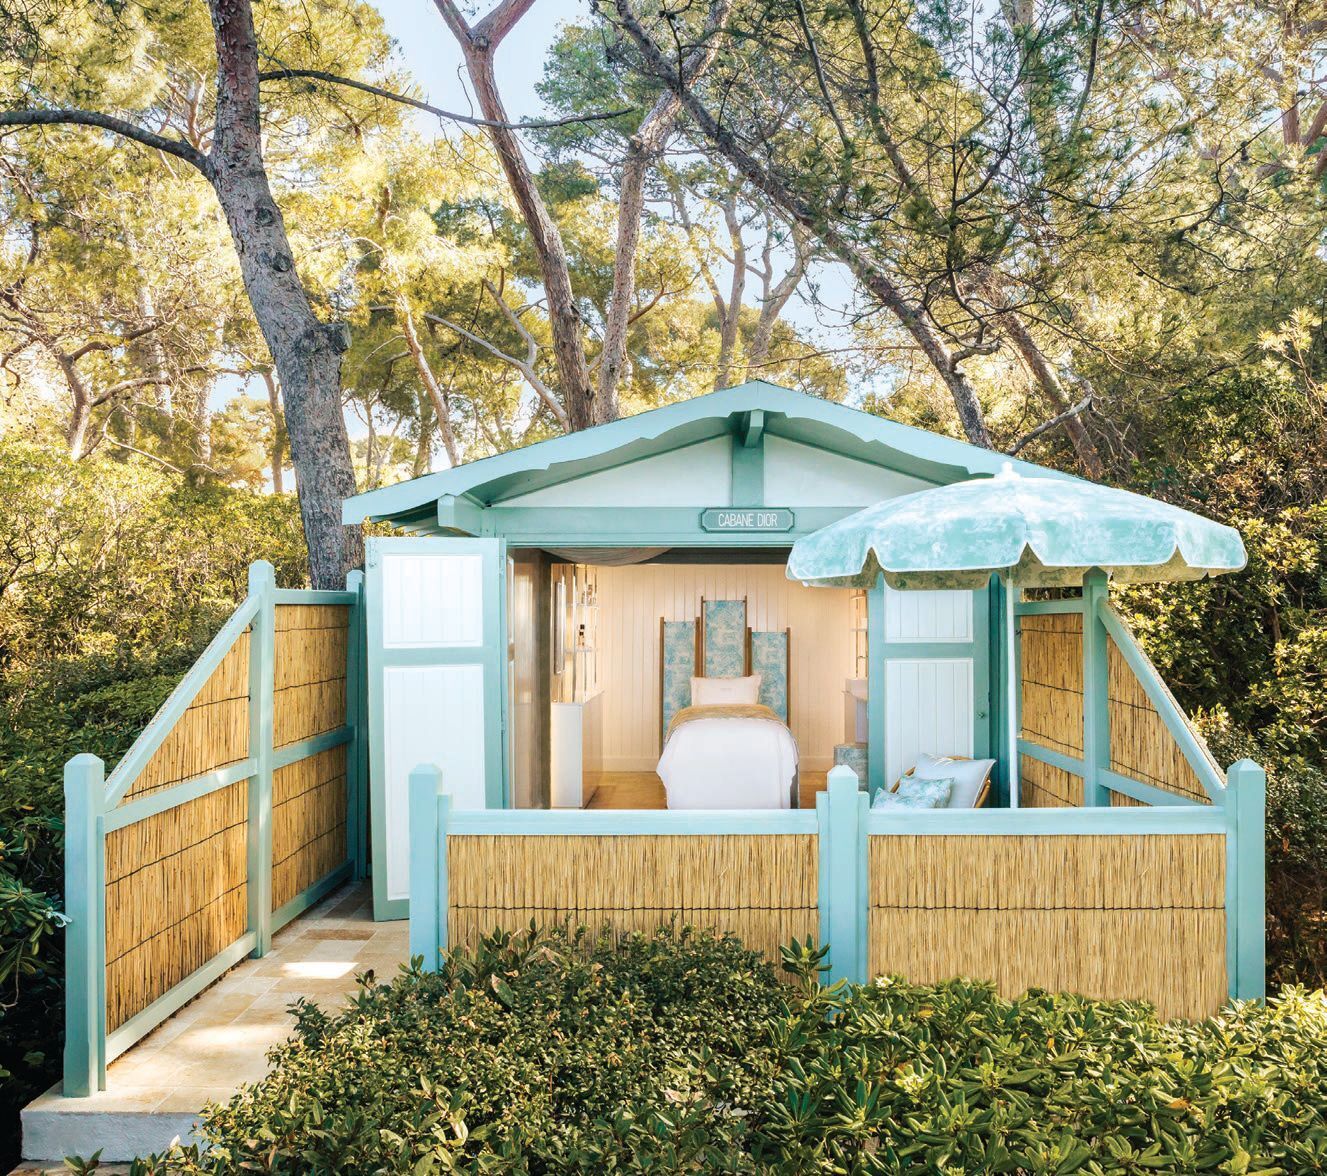 A historic cabana decorated in shades of sage green and white offers a treatment cocoon for one PHOTO COURTESY OF BRAND